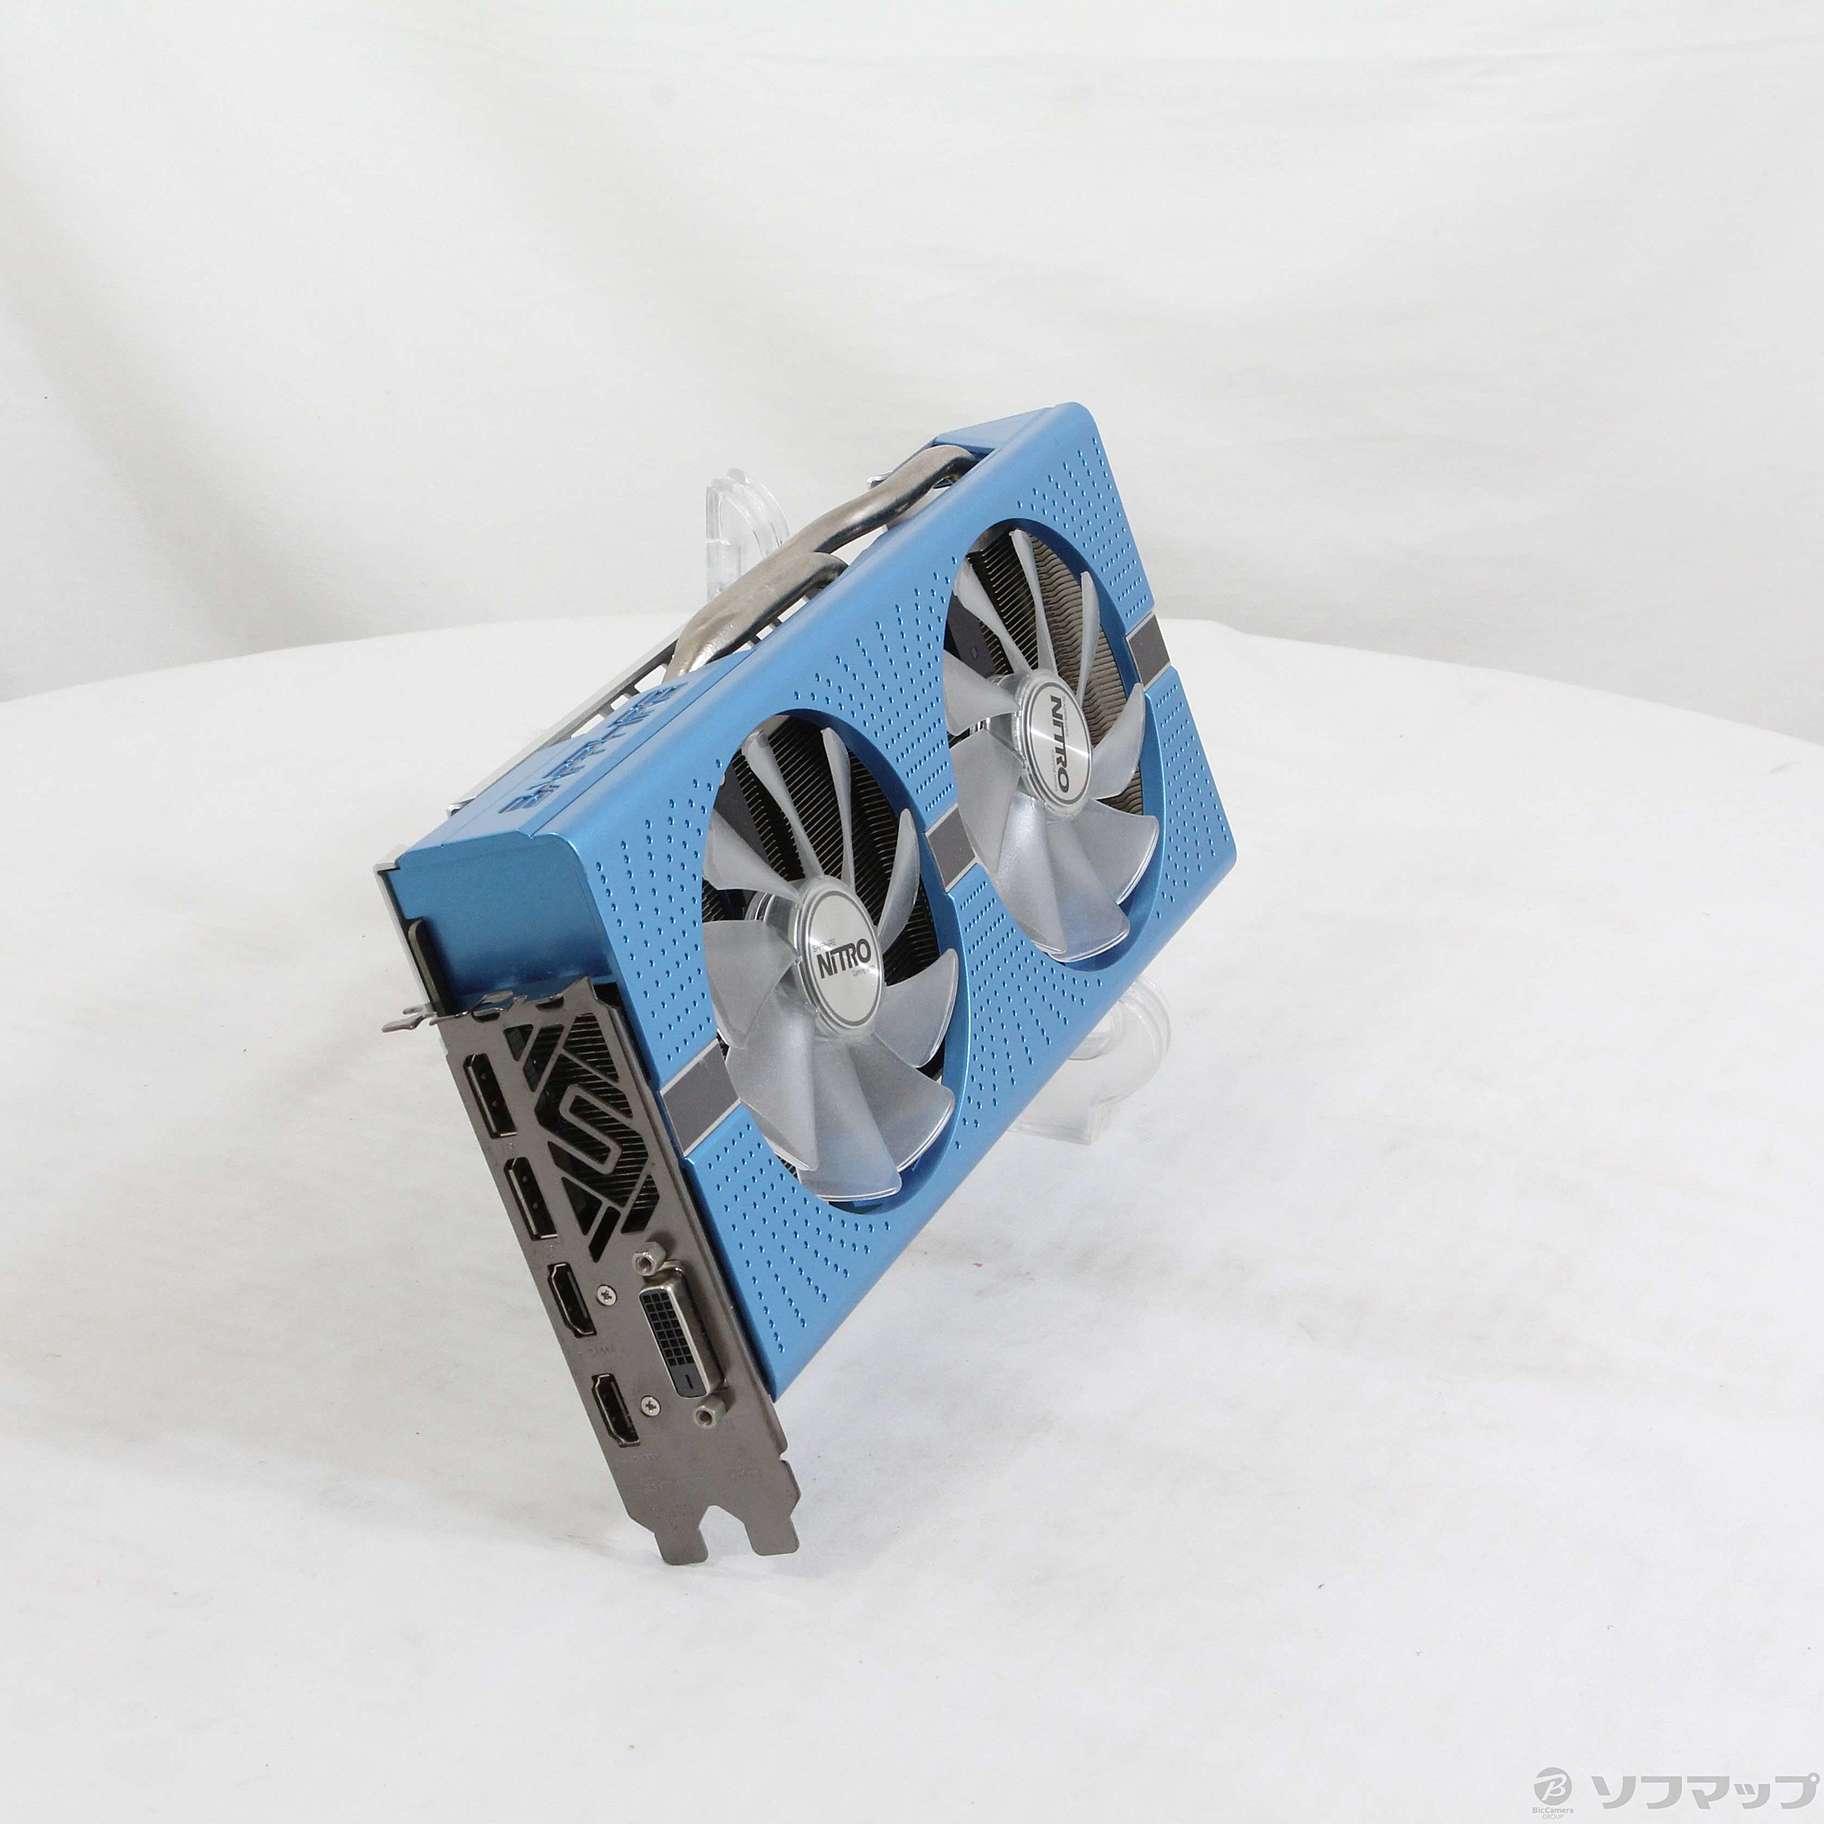 RX 580 8G GDDR5 SAPPHIRE Special Edition